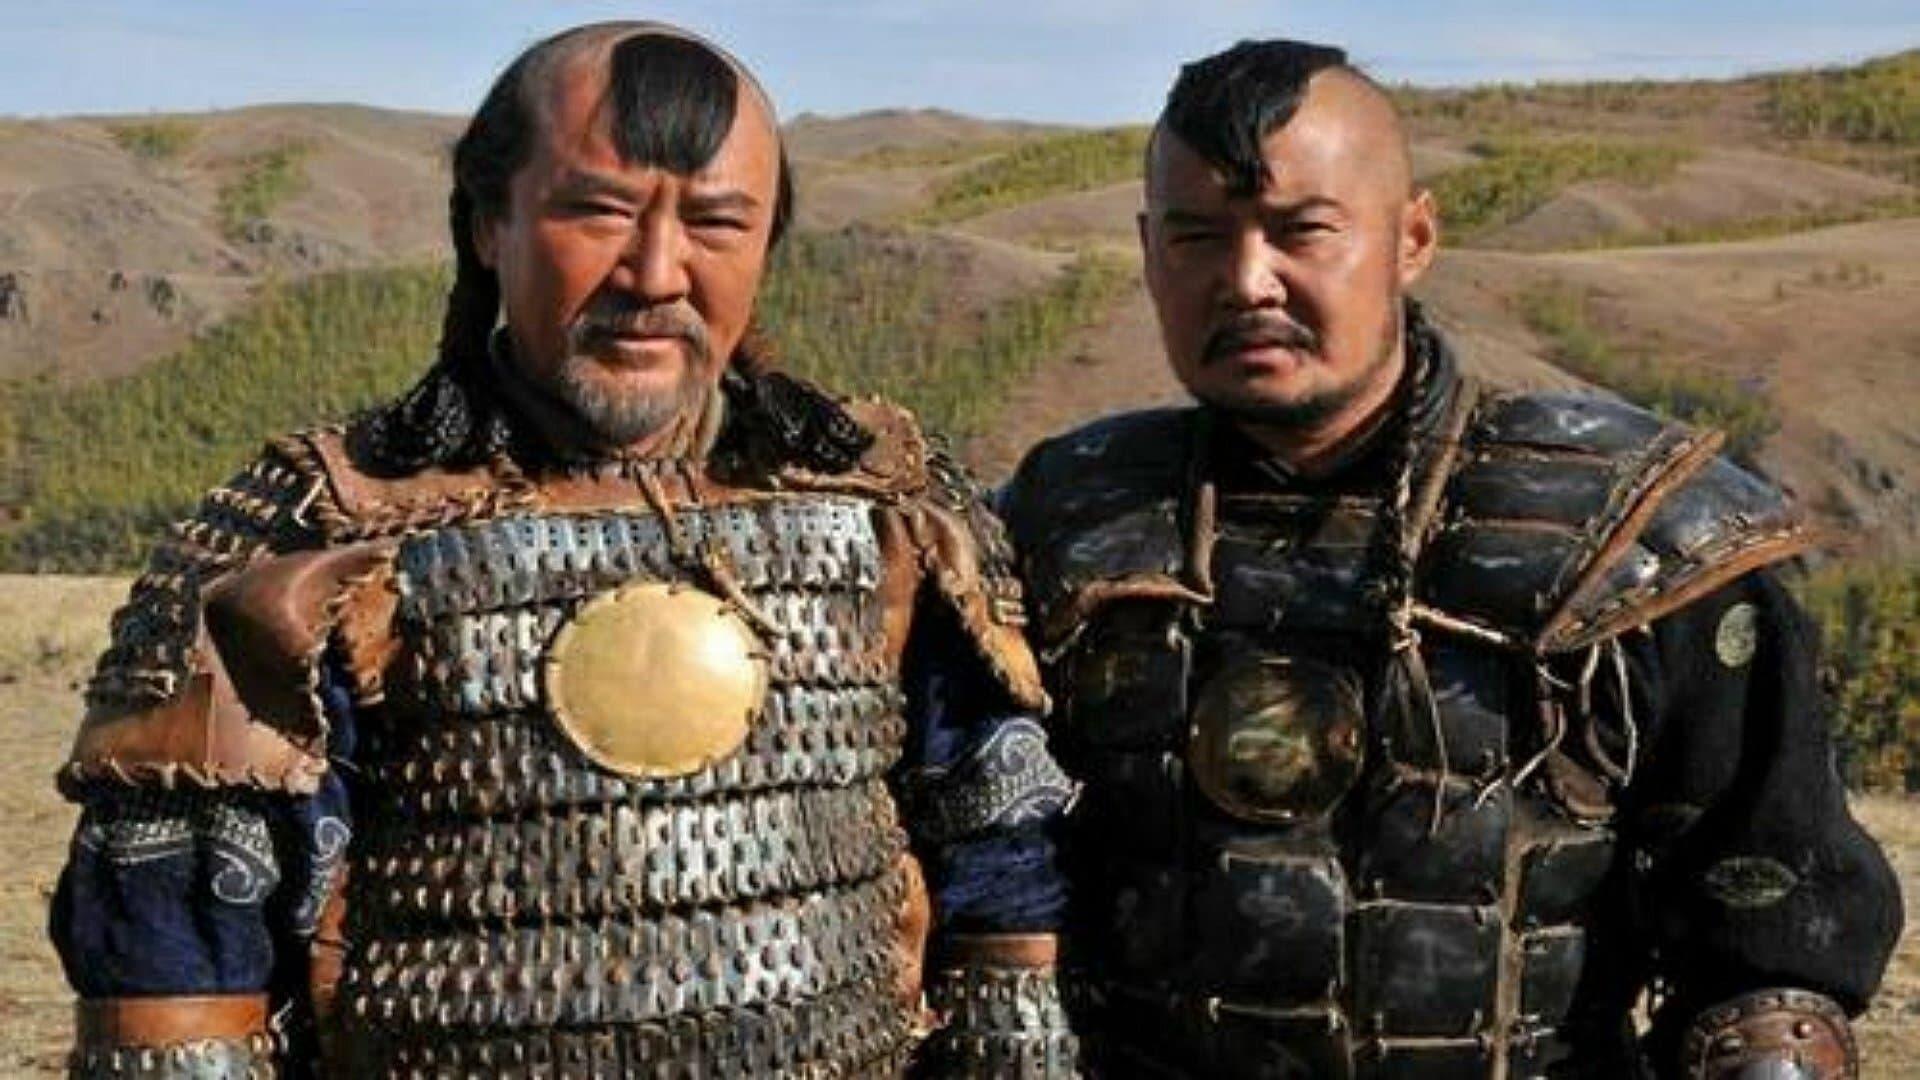 Genghis: The Legend of the Ten backdrop